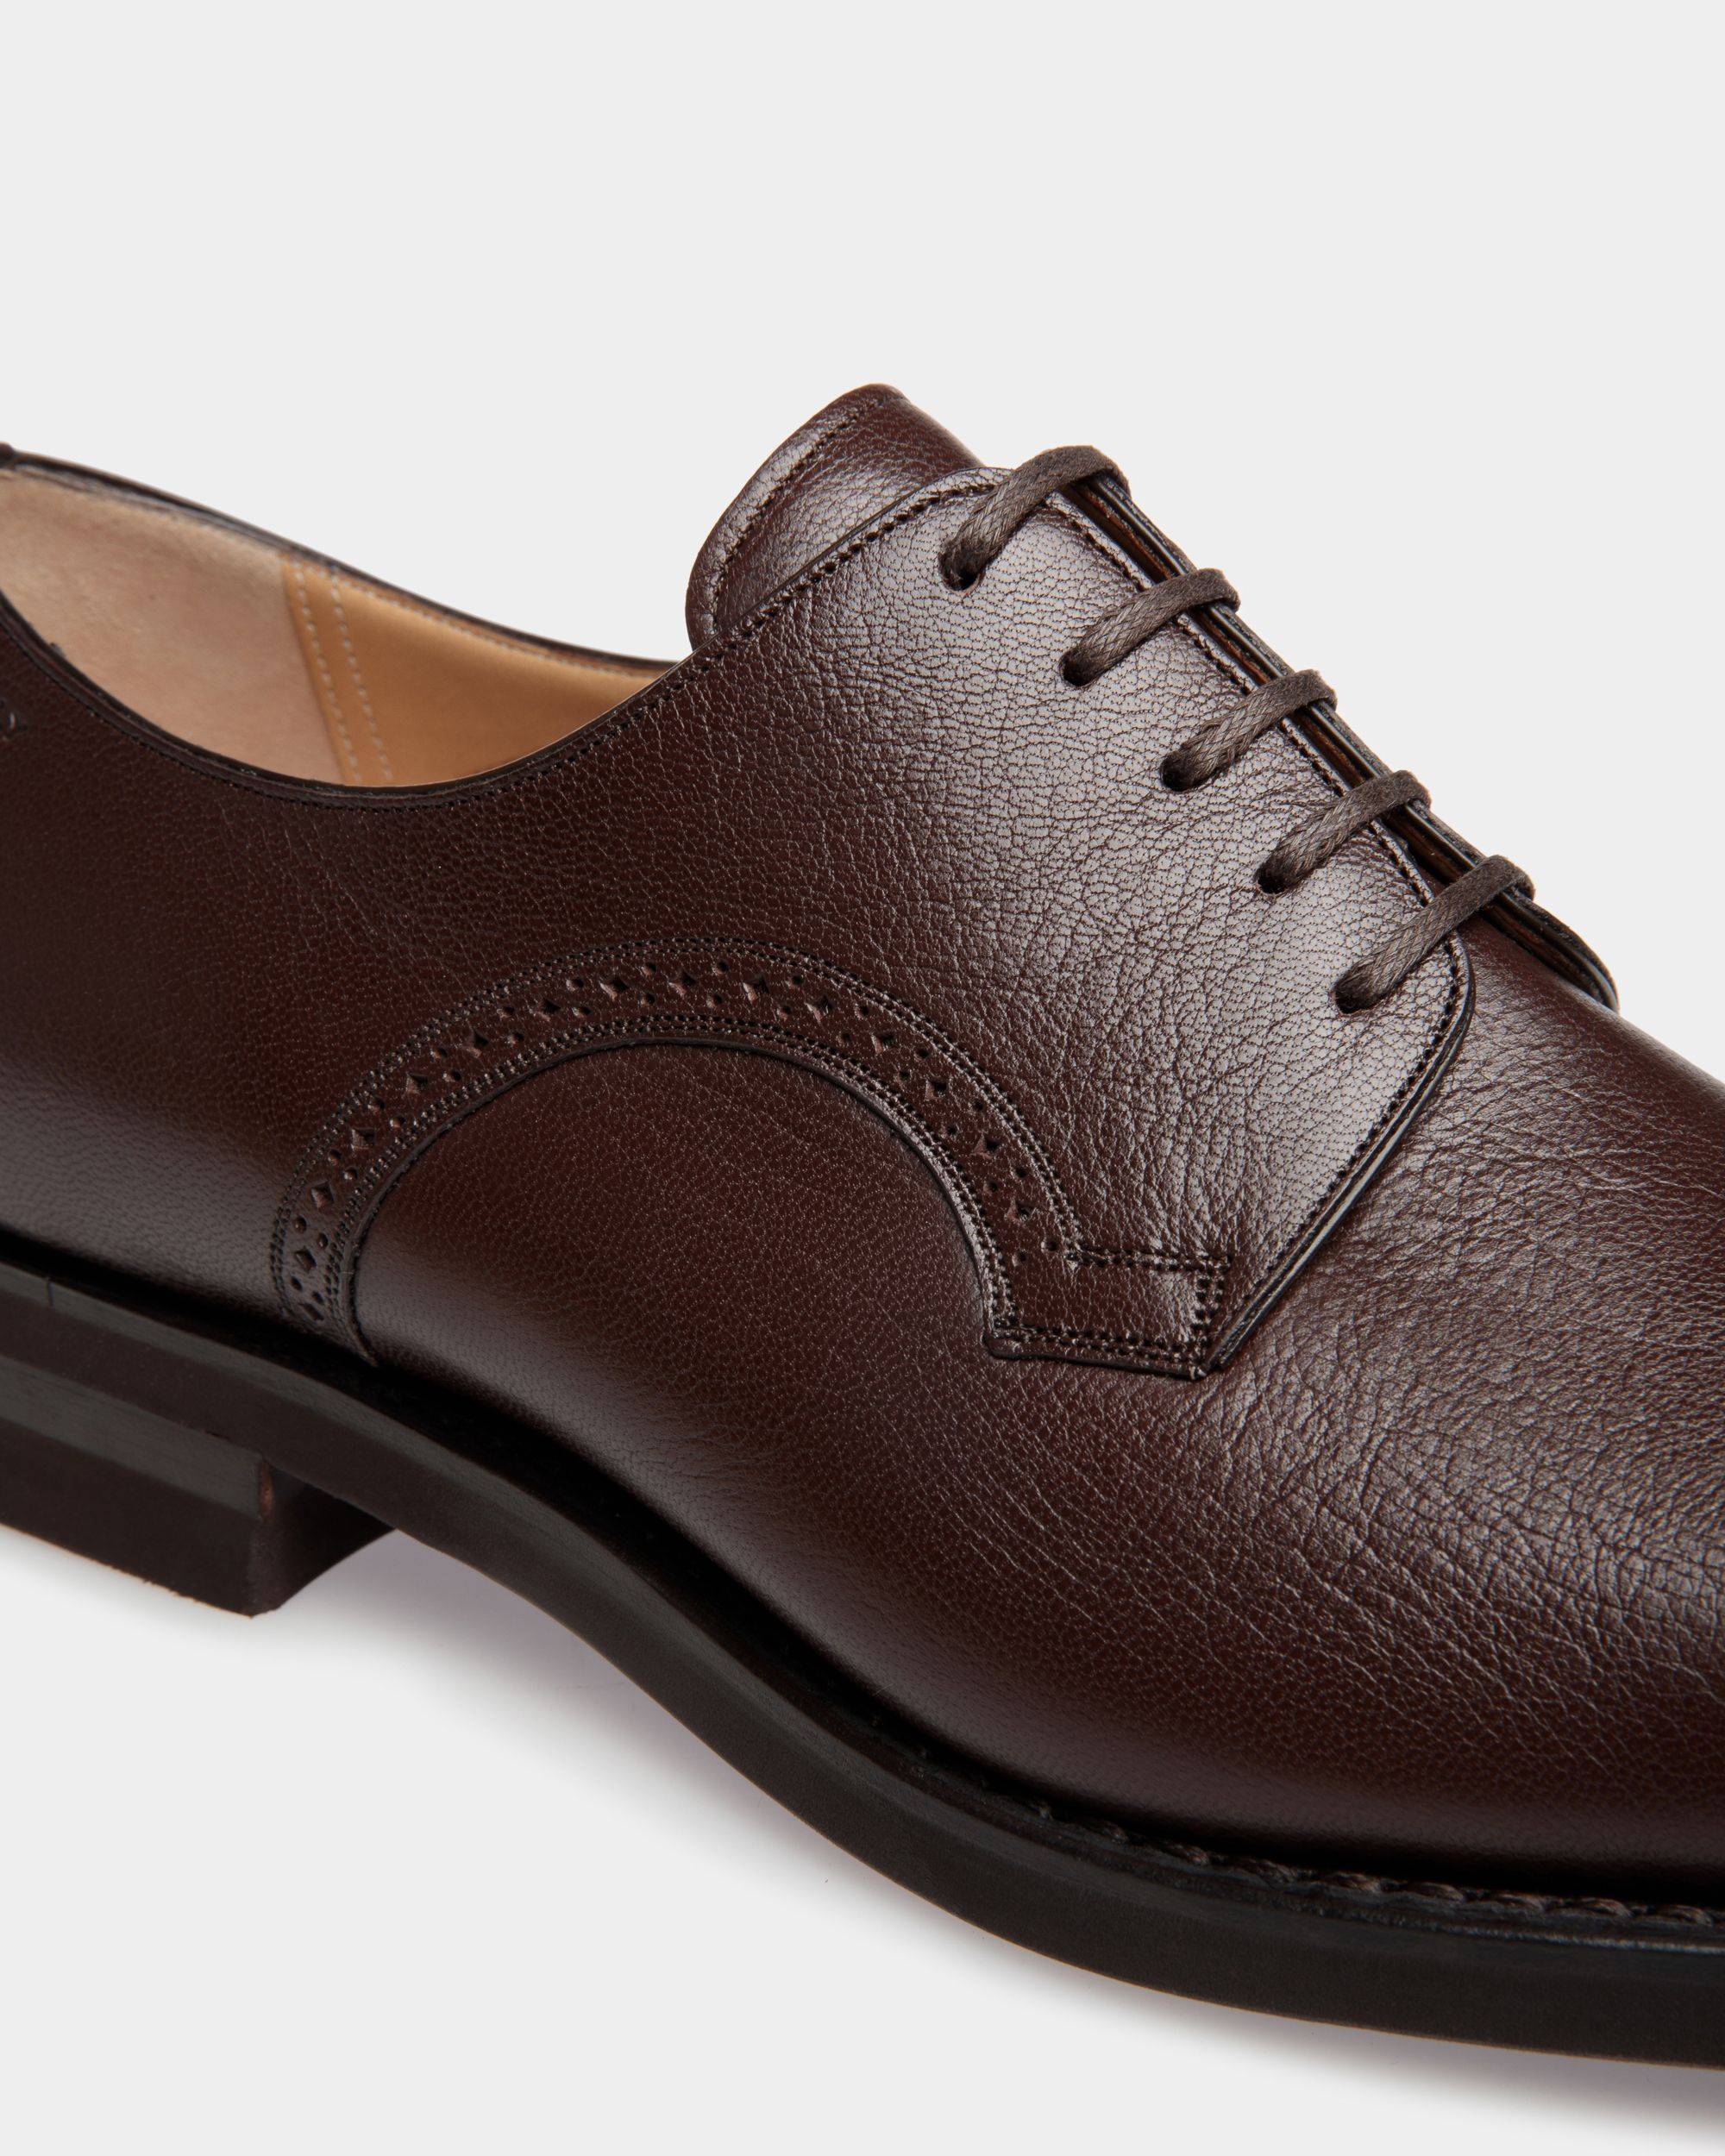 Scribe | Men's Derby in Brown Grained Leather | Bally | Still Life Detail